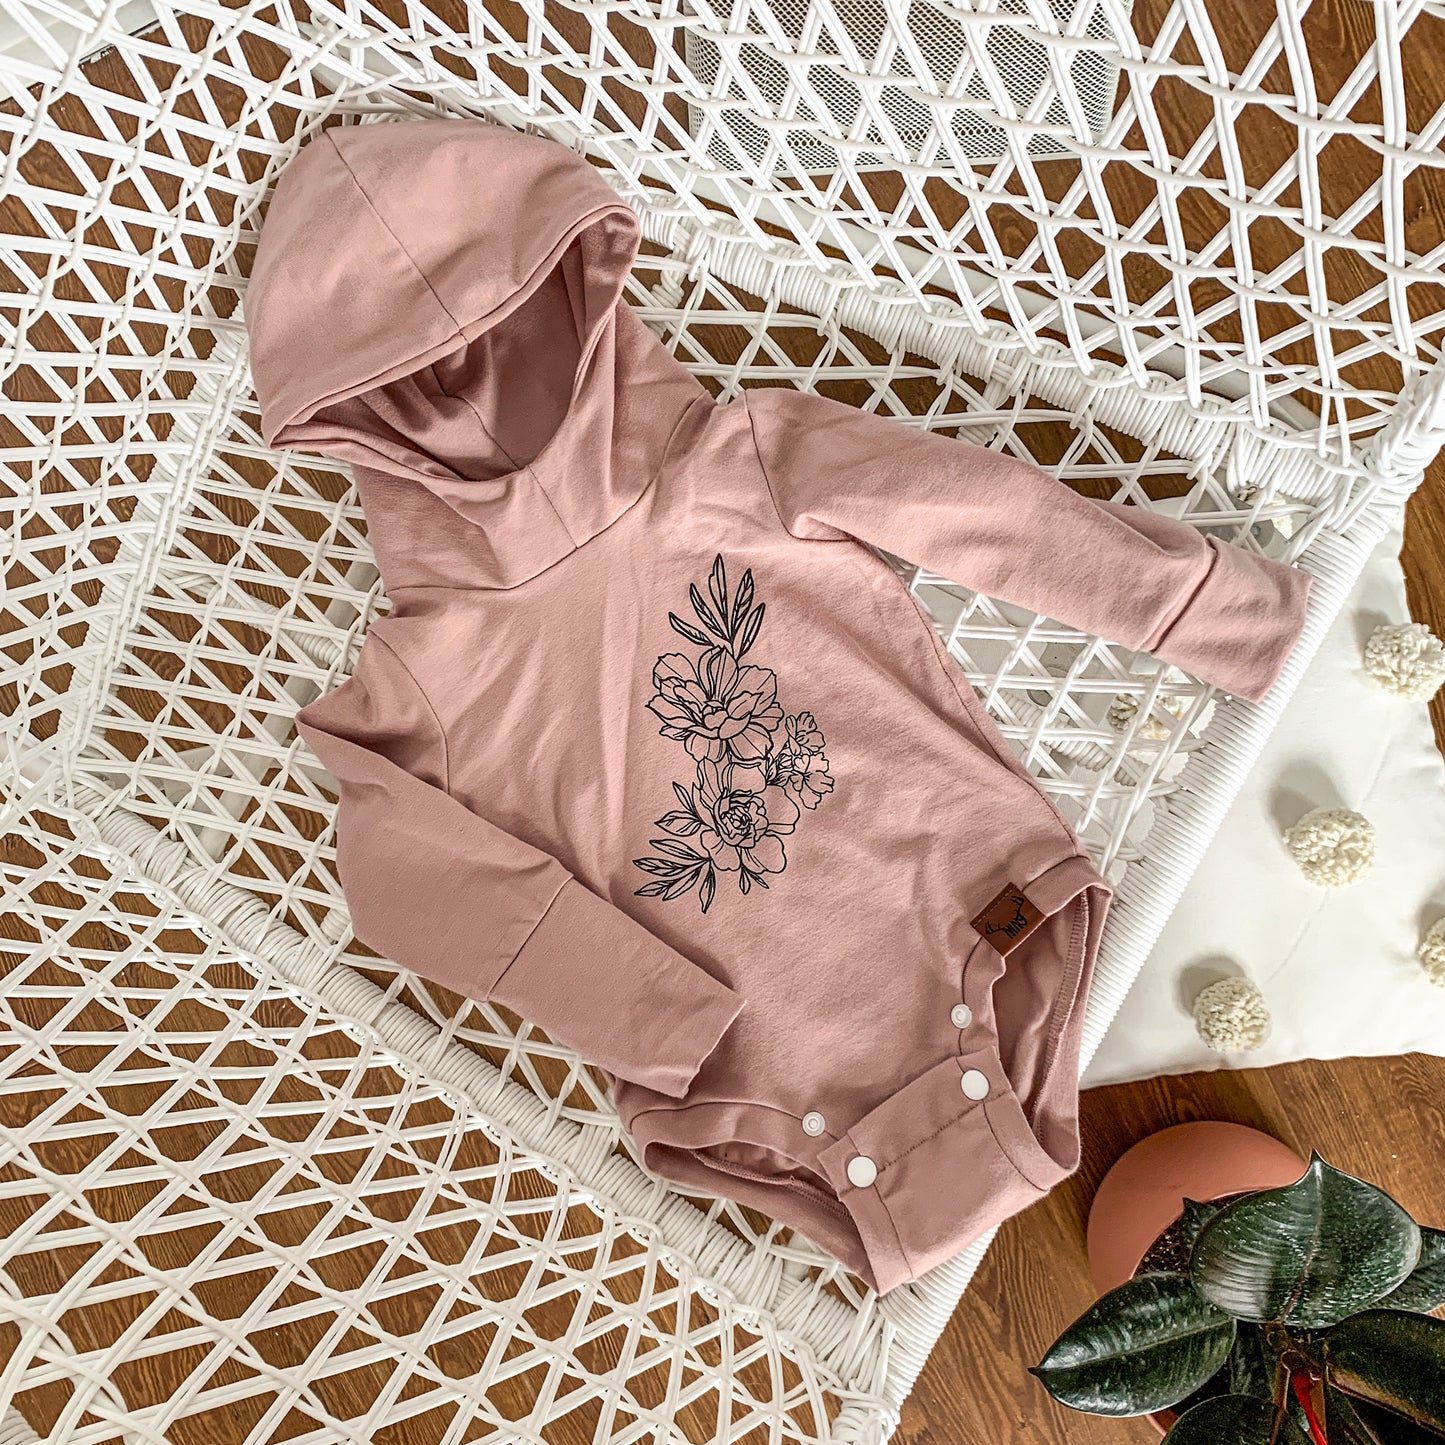 Cache-couche évolutif fleurs roses à manches longues et capuchon Nine Clothing Grow with me onesie pink flower with long sleeves and hood